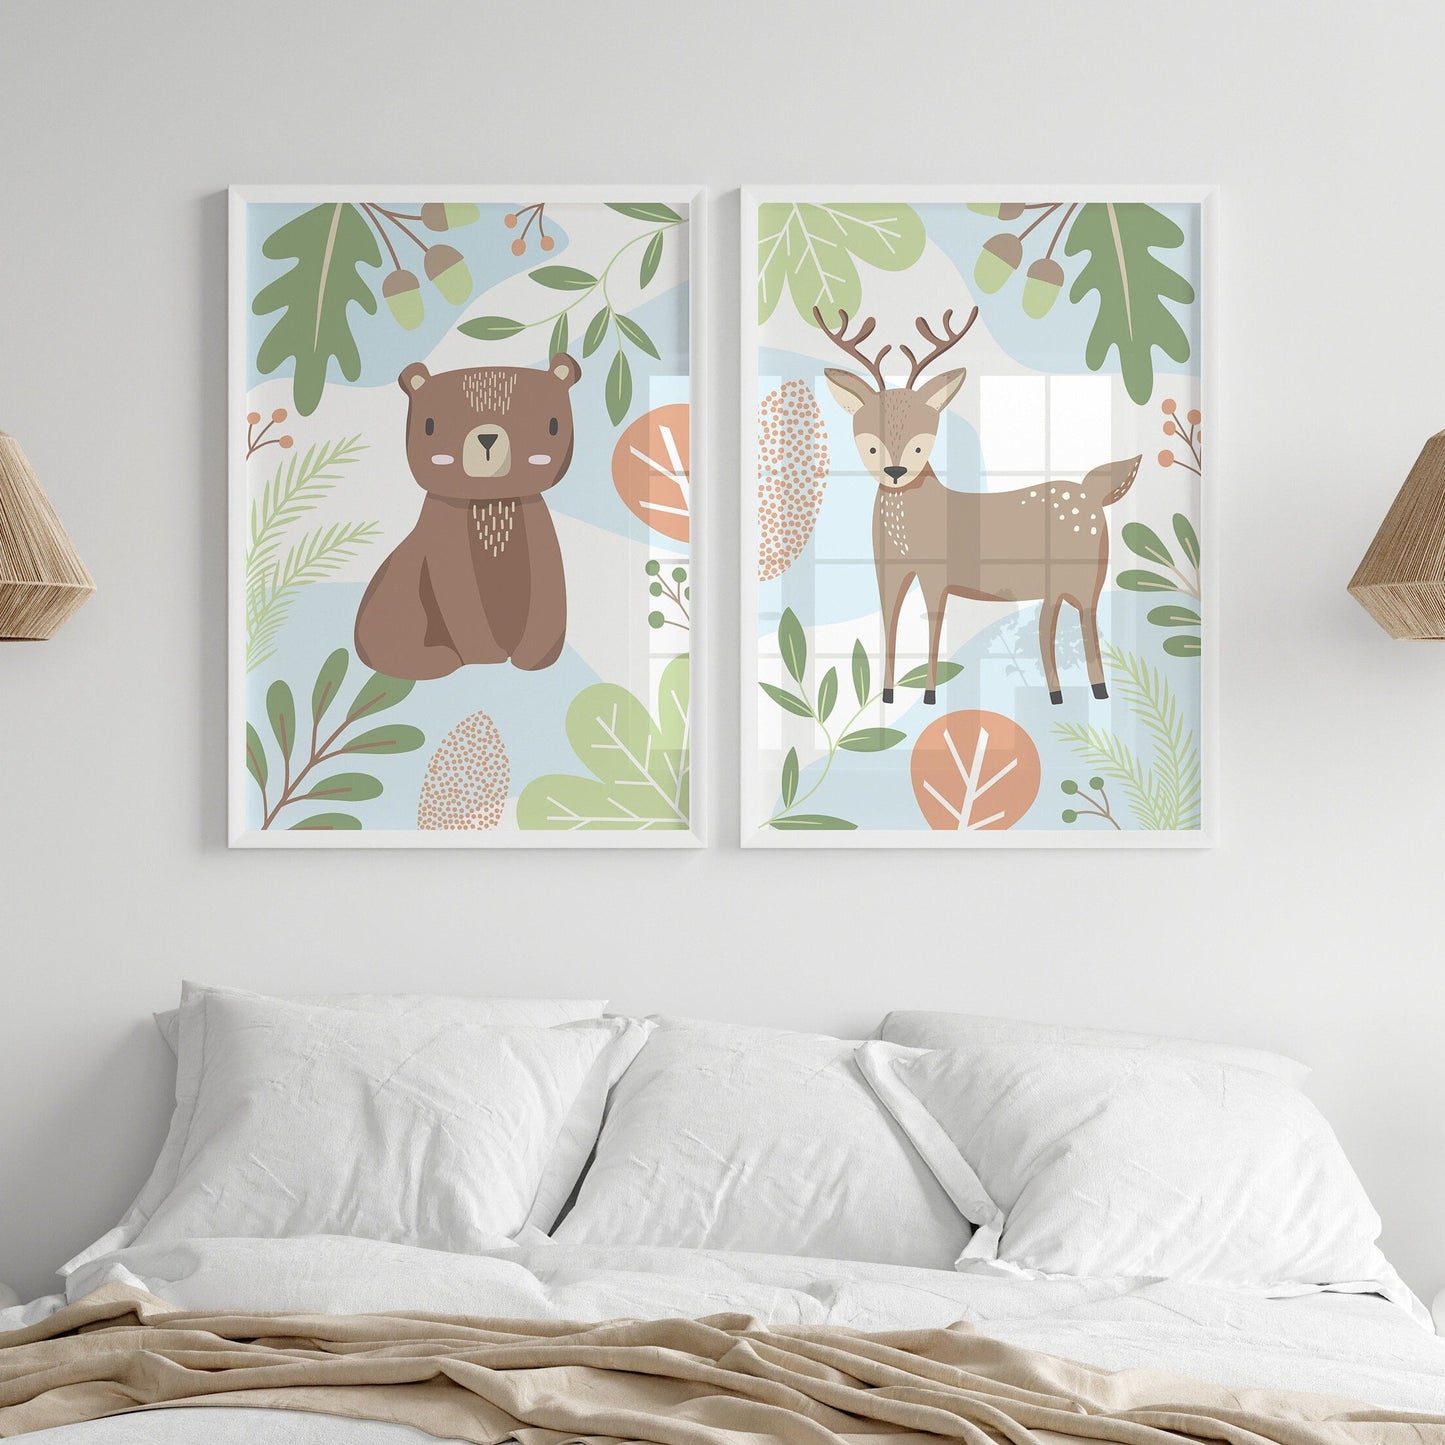 Woodland animal nursery print set for baby boy, personalised name art for toddler bedroom with bear and deer